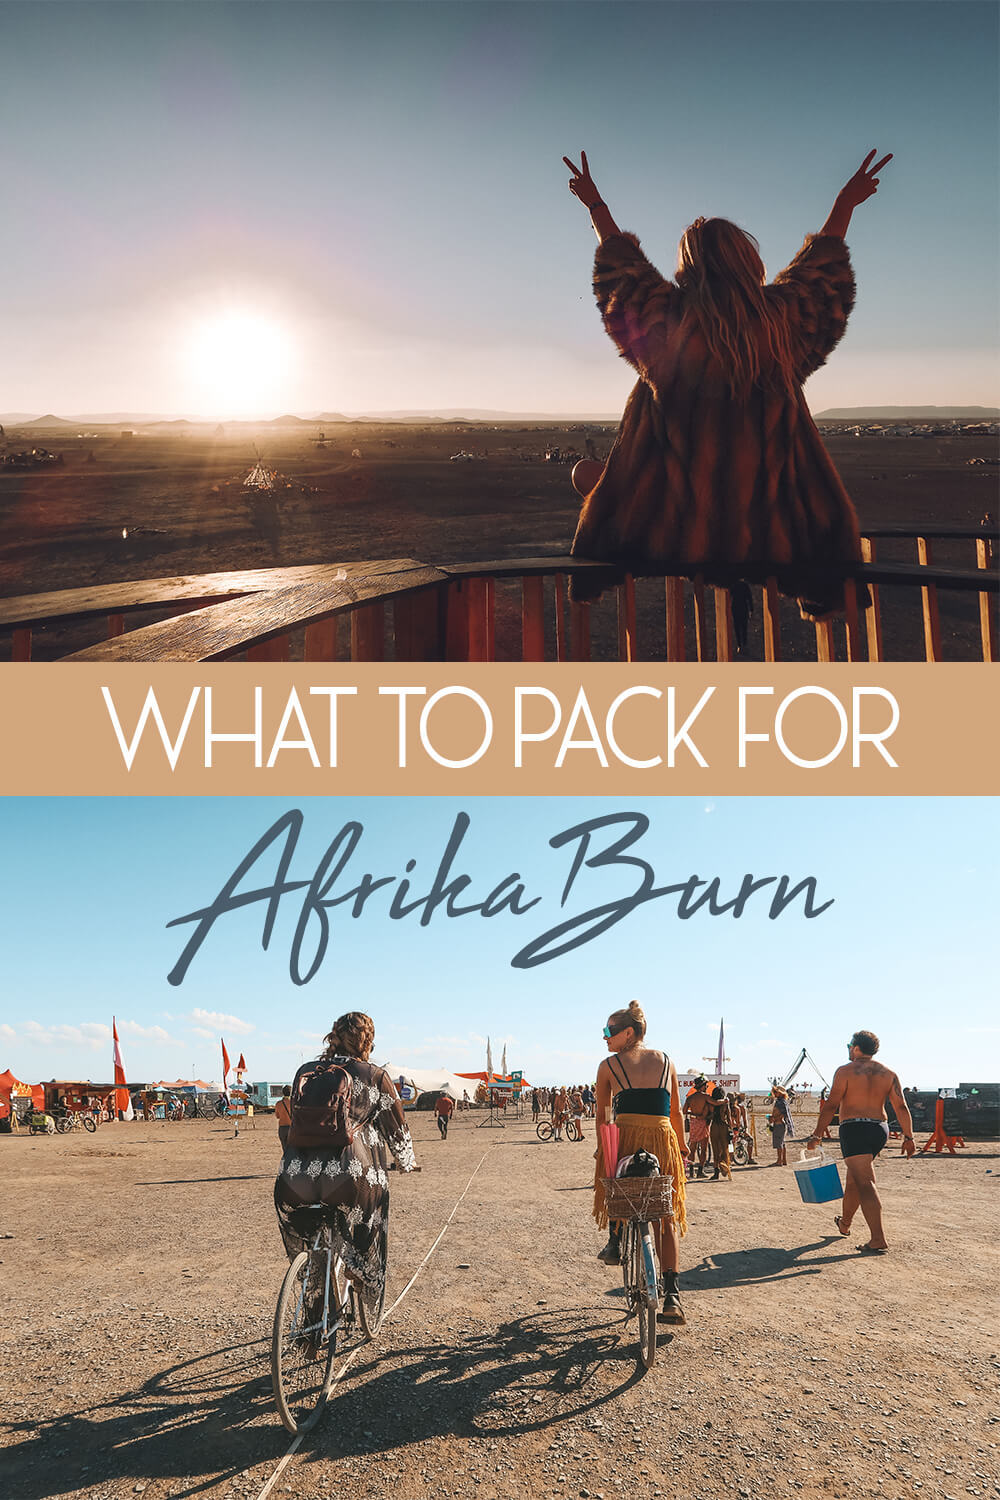 What to Pack for AfrikaBurn